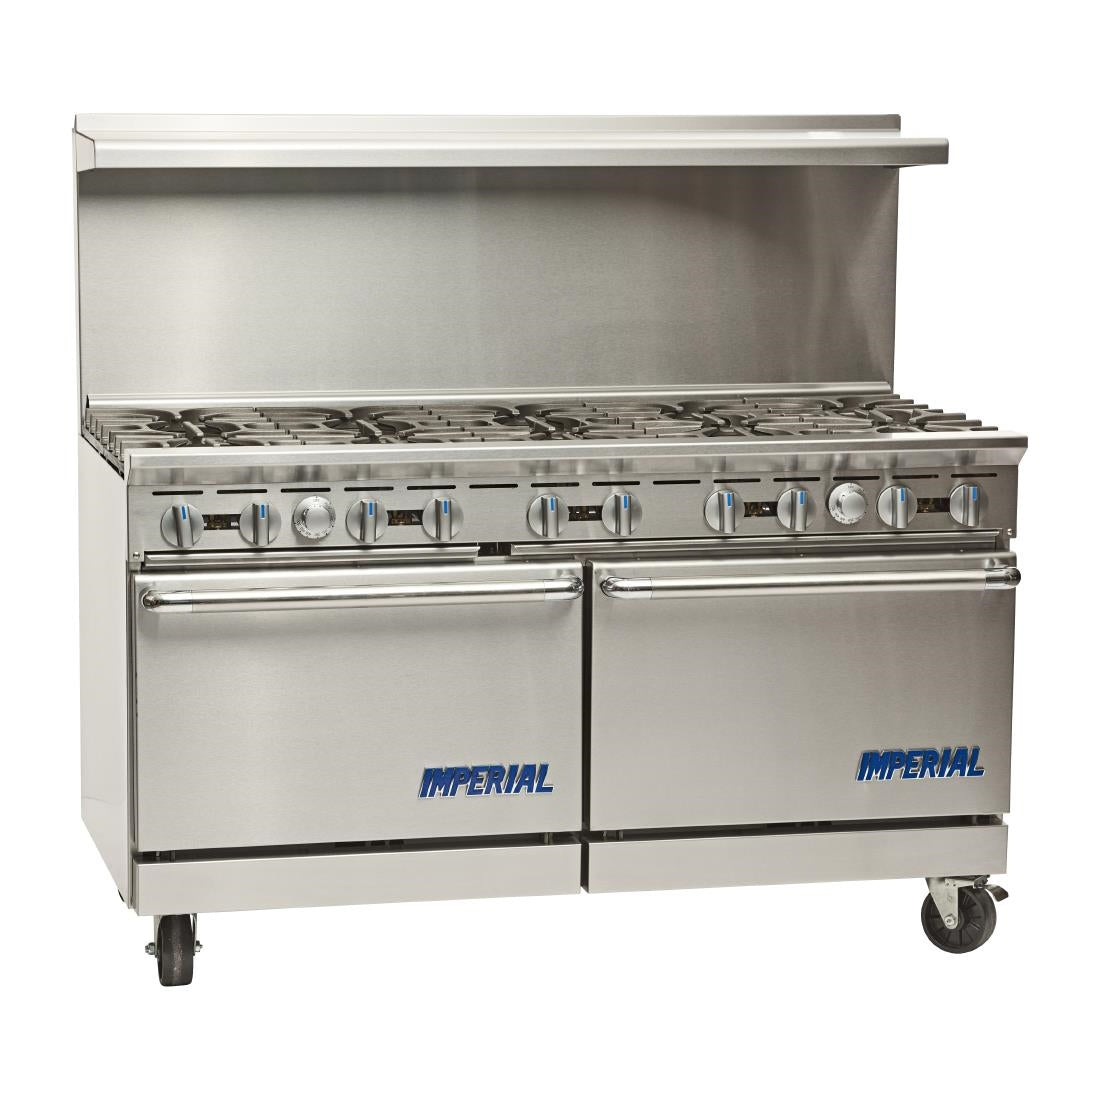 CX155 Imperial IR10 10 Burner & Double Oven Range JD Catering Equipment Solutions Ltd